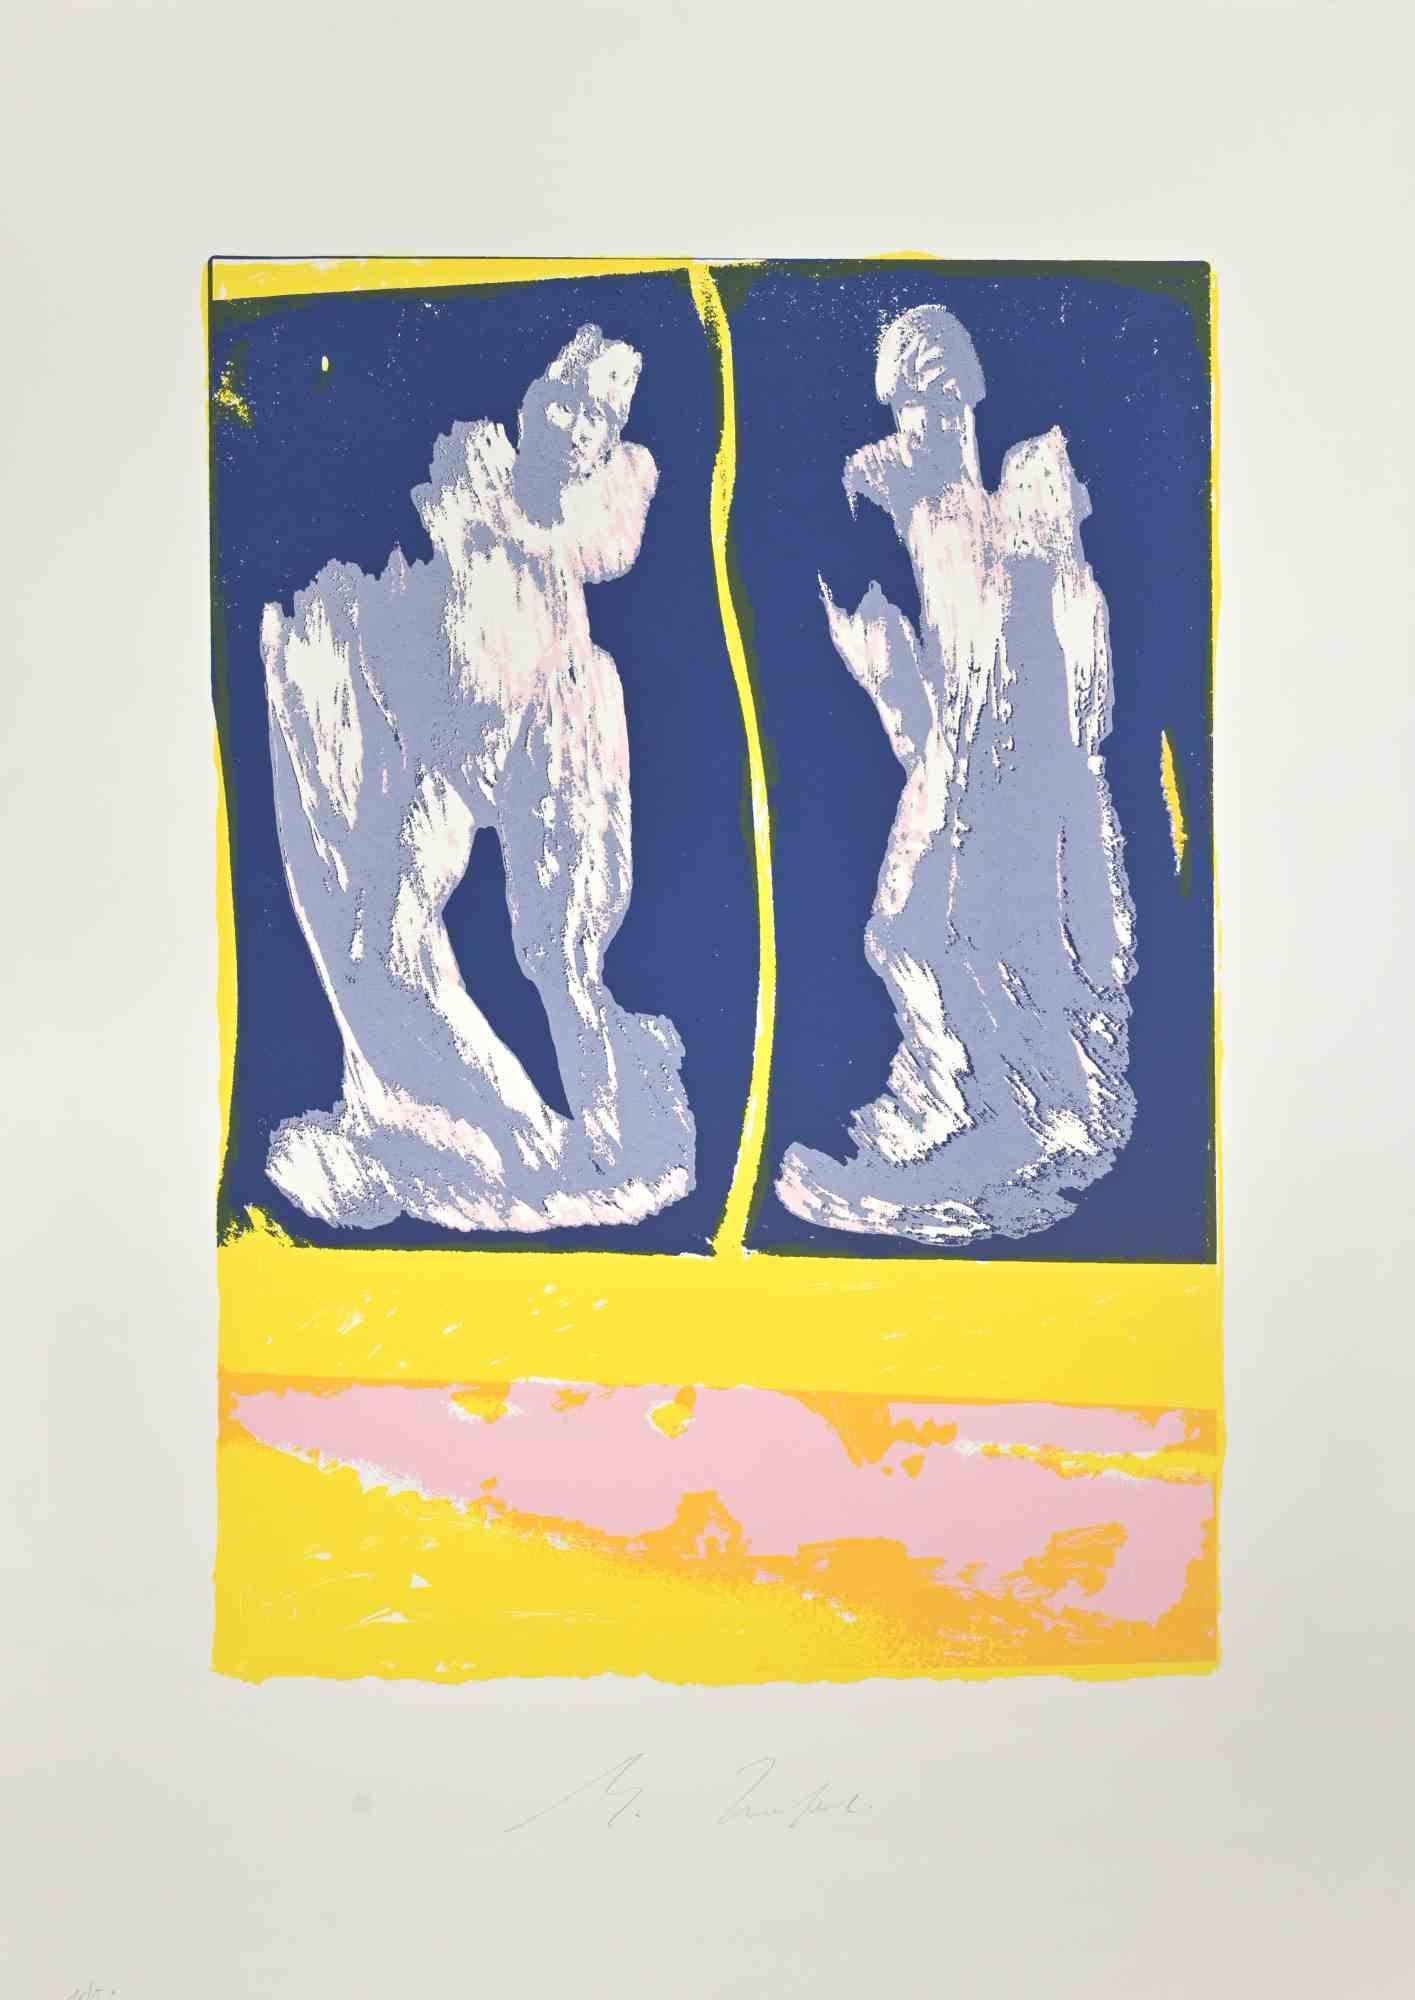 Figures is a Lithograph realized by Mino Trafeli in 1980s. 

Edition 16/50.

Hand signed.

Good conditions.

 

Mino Trafeli (Volterra, December 29, 1922 - Volterra, August 9, 2018) was an Italian sculptor and partisan.

Fundamental to his education